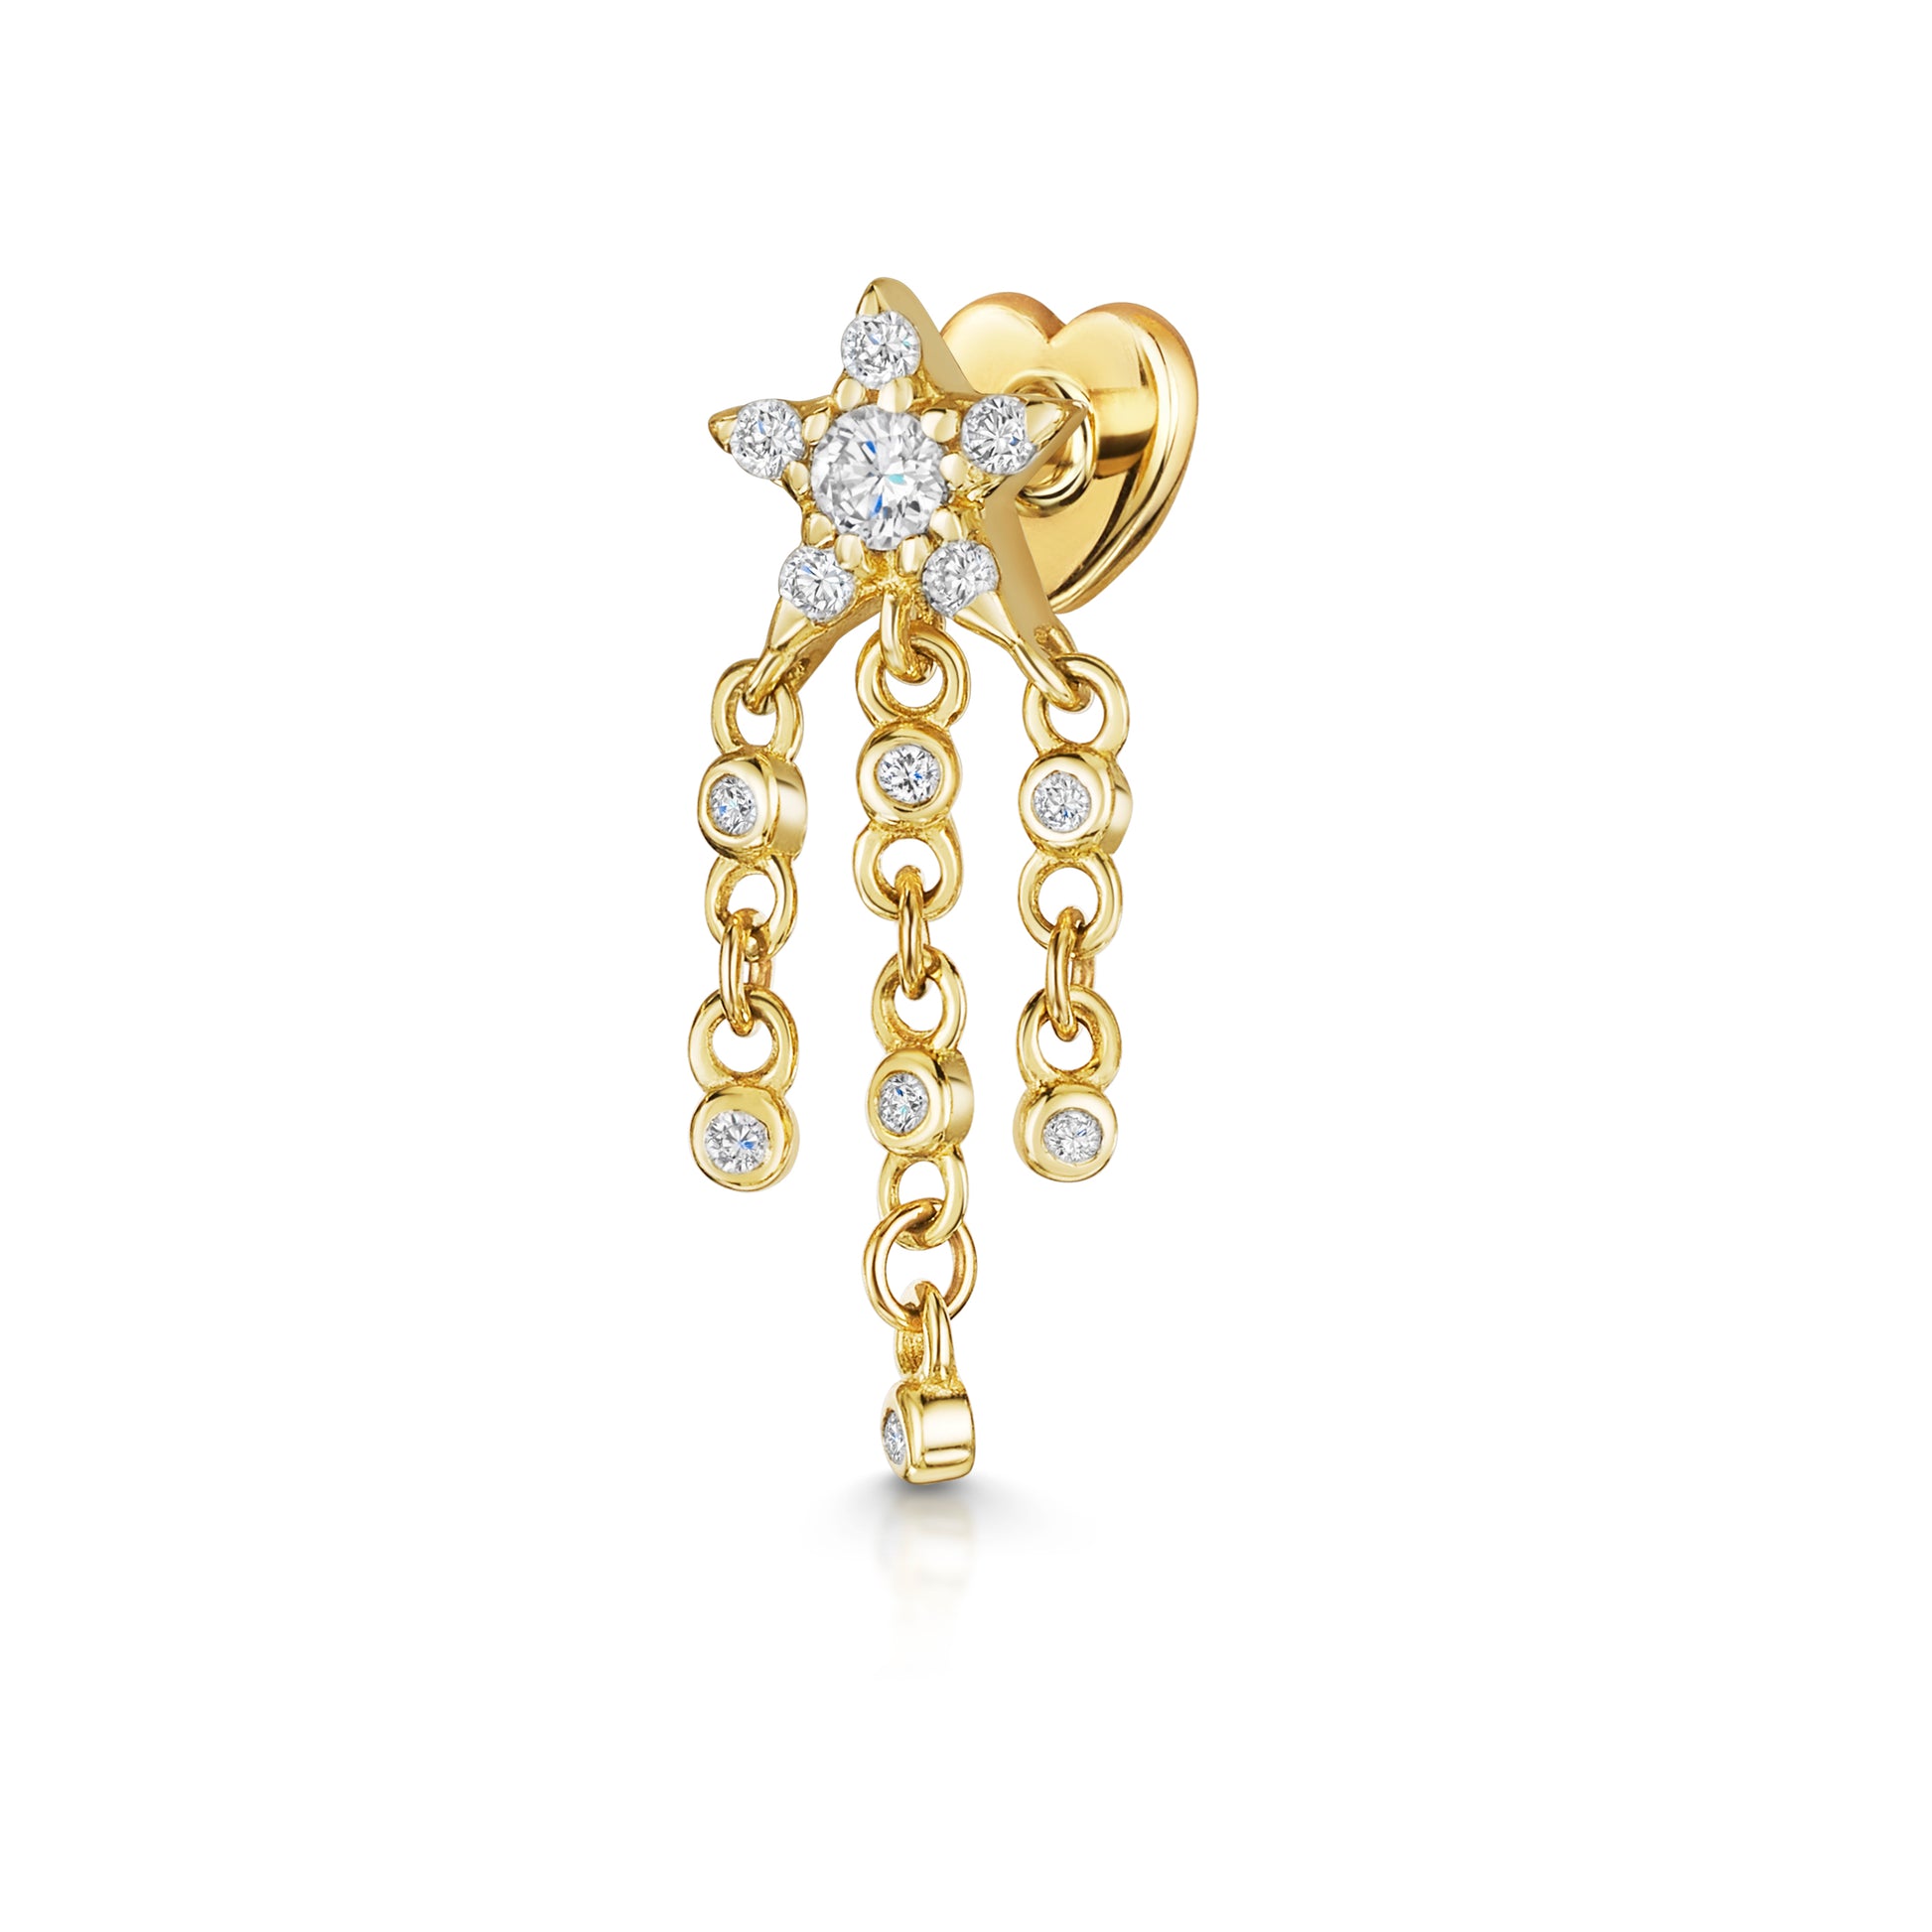 14k solid yellow gold shooting star flat back labret stud earring 8mm - LAURA BOND jewellery